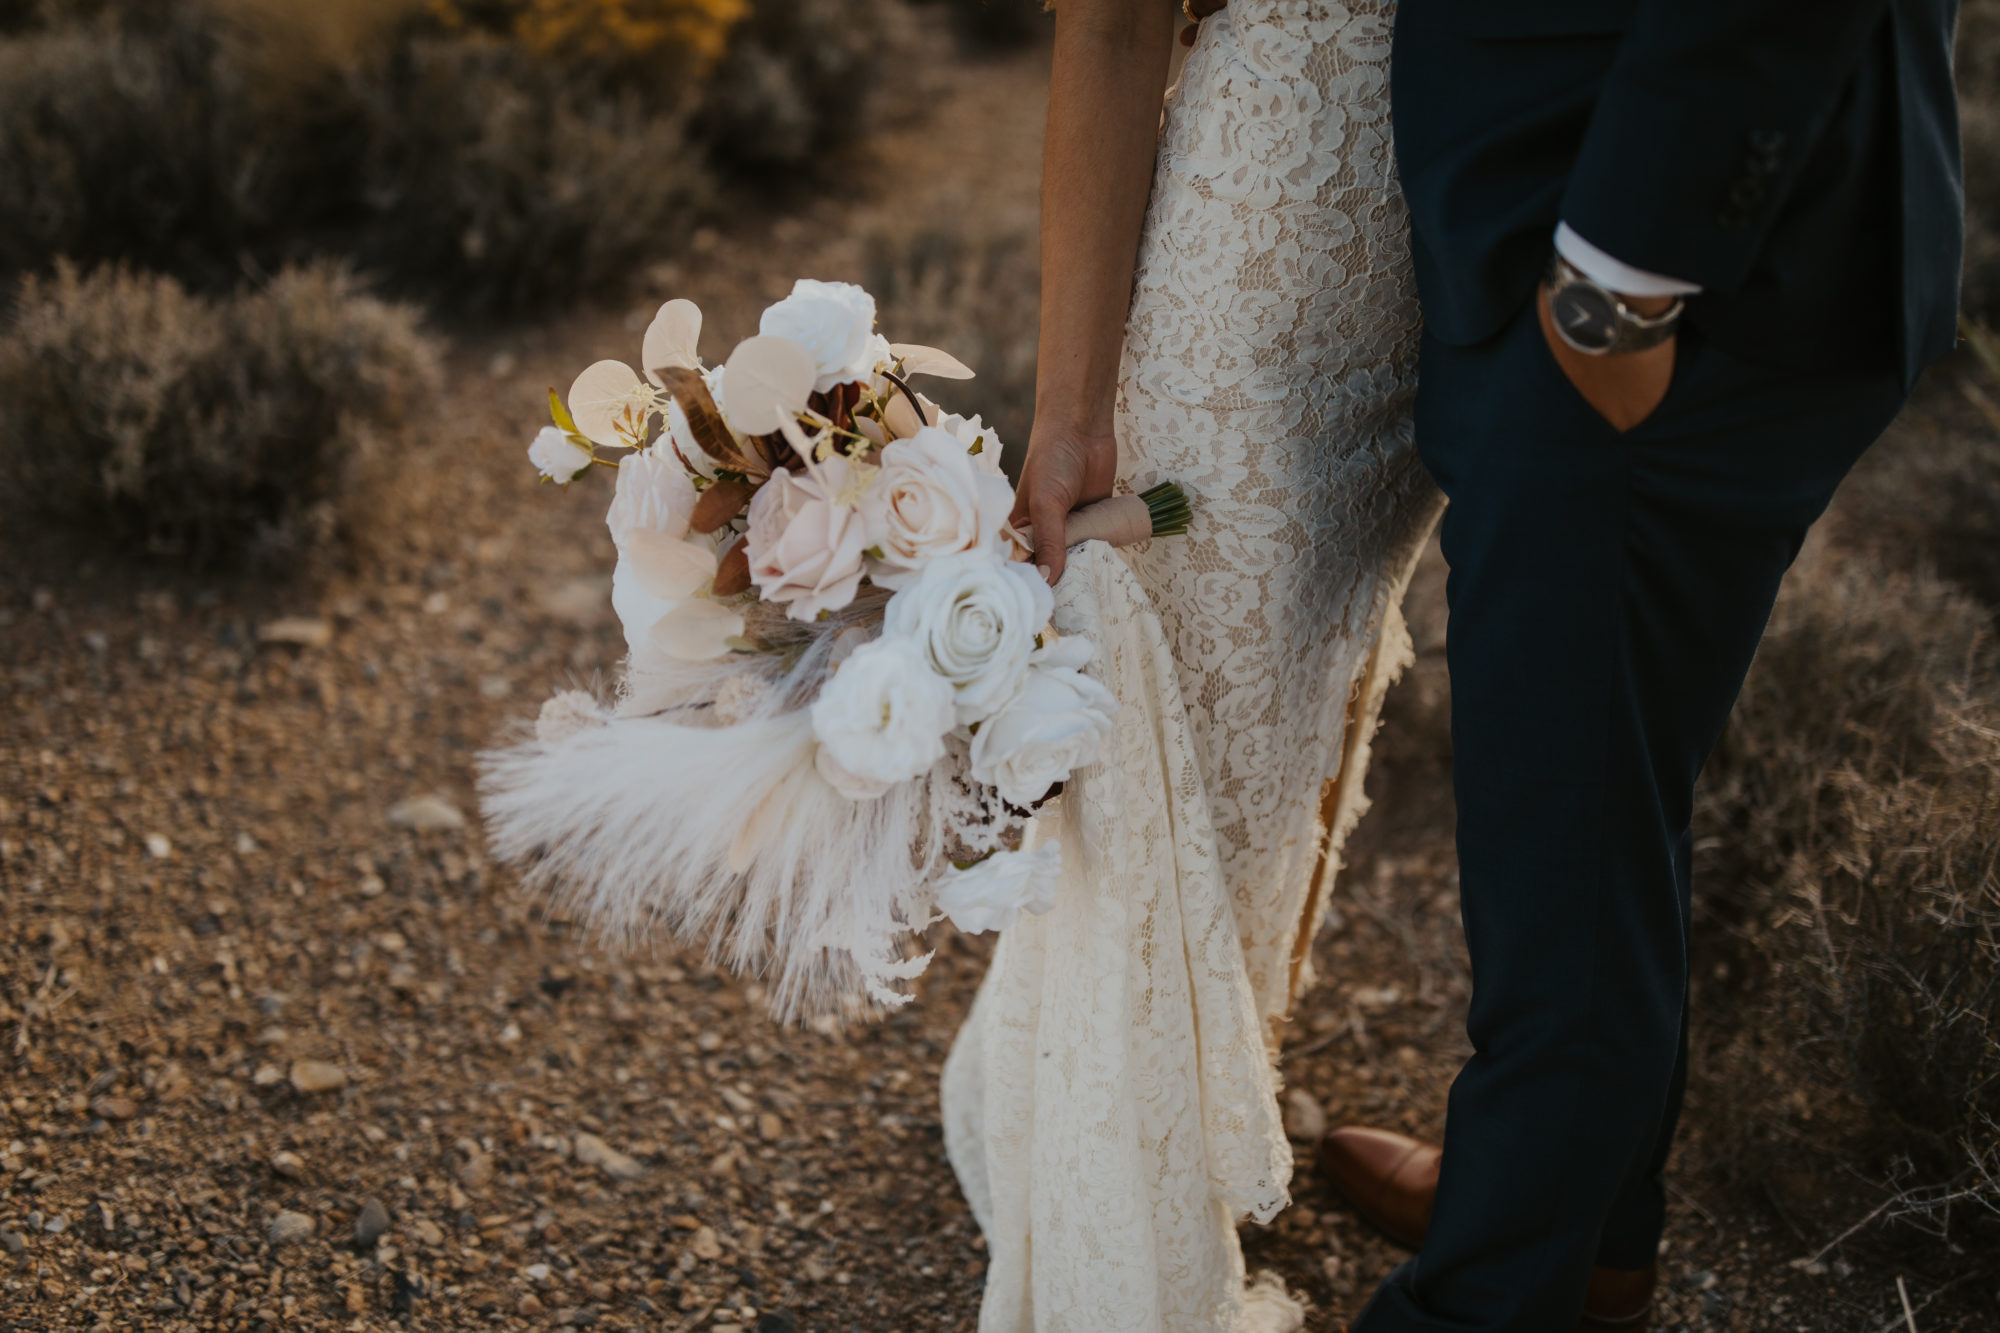 detail photo of bridal boquet and wedding dress during adventure photo session